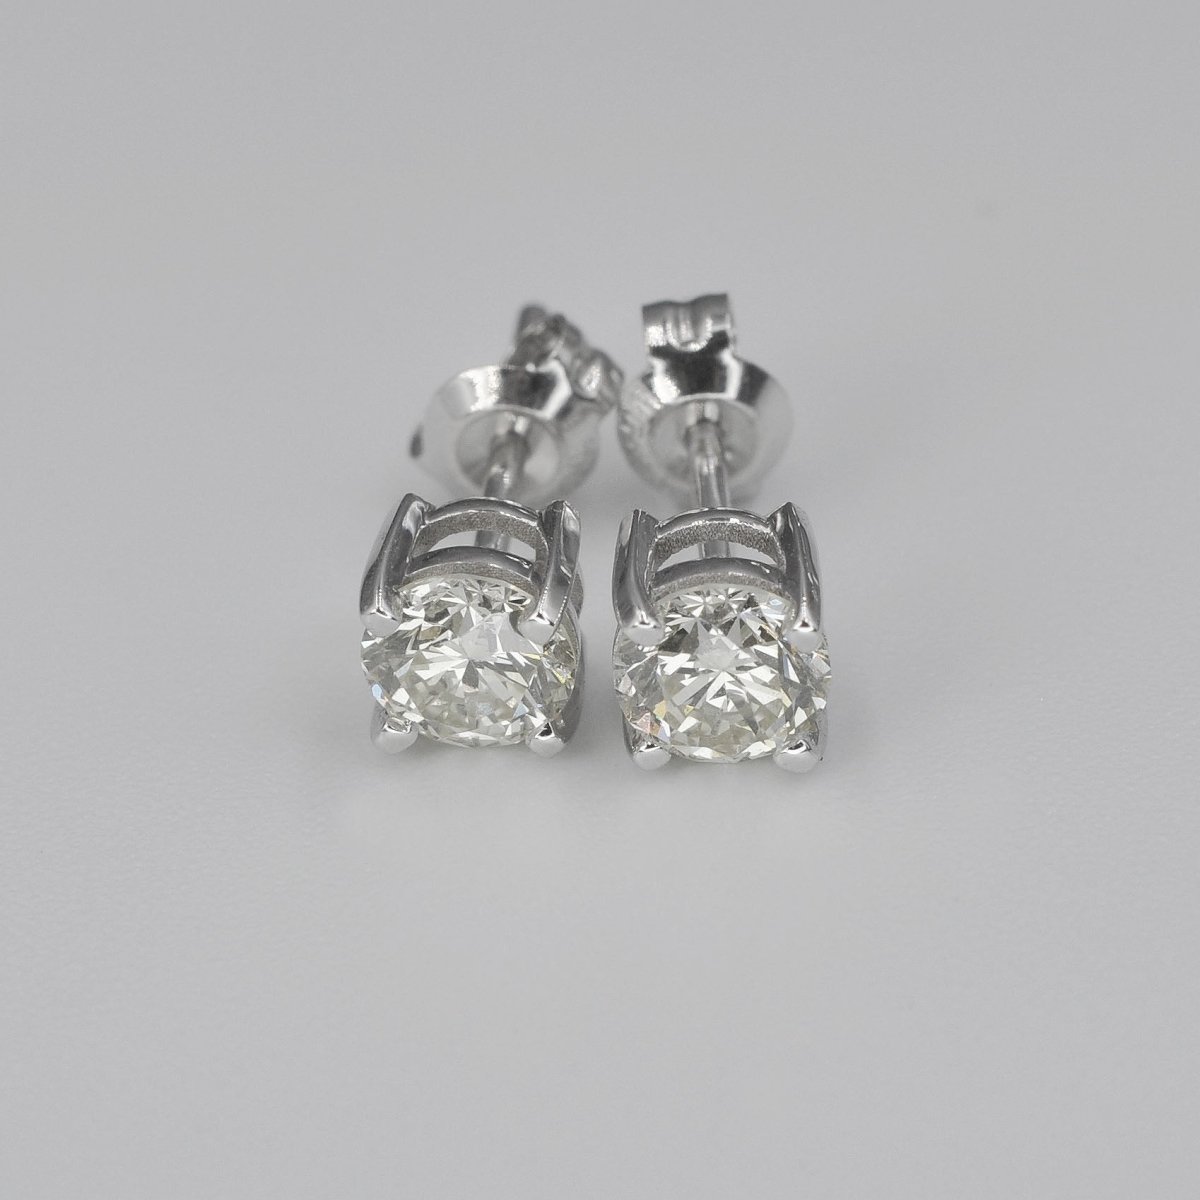 Bargain 0.50 CT Round Cut Diamond Stud Earrings in 14KT White Gold - Primestyle.com